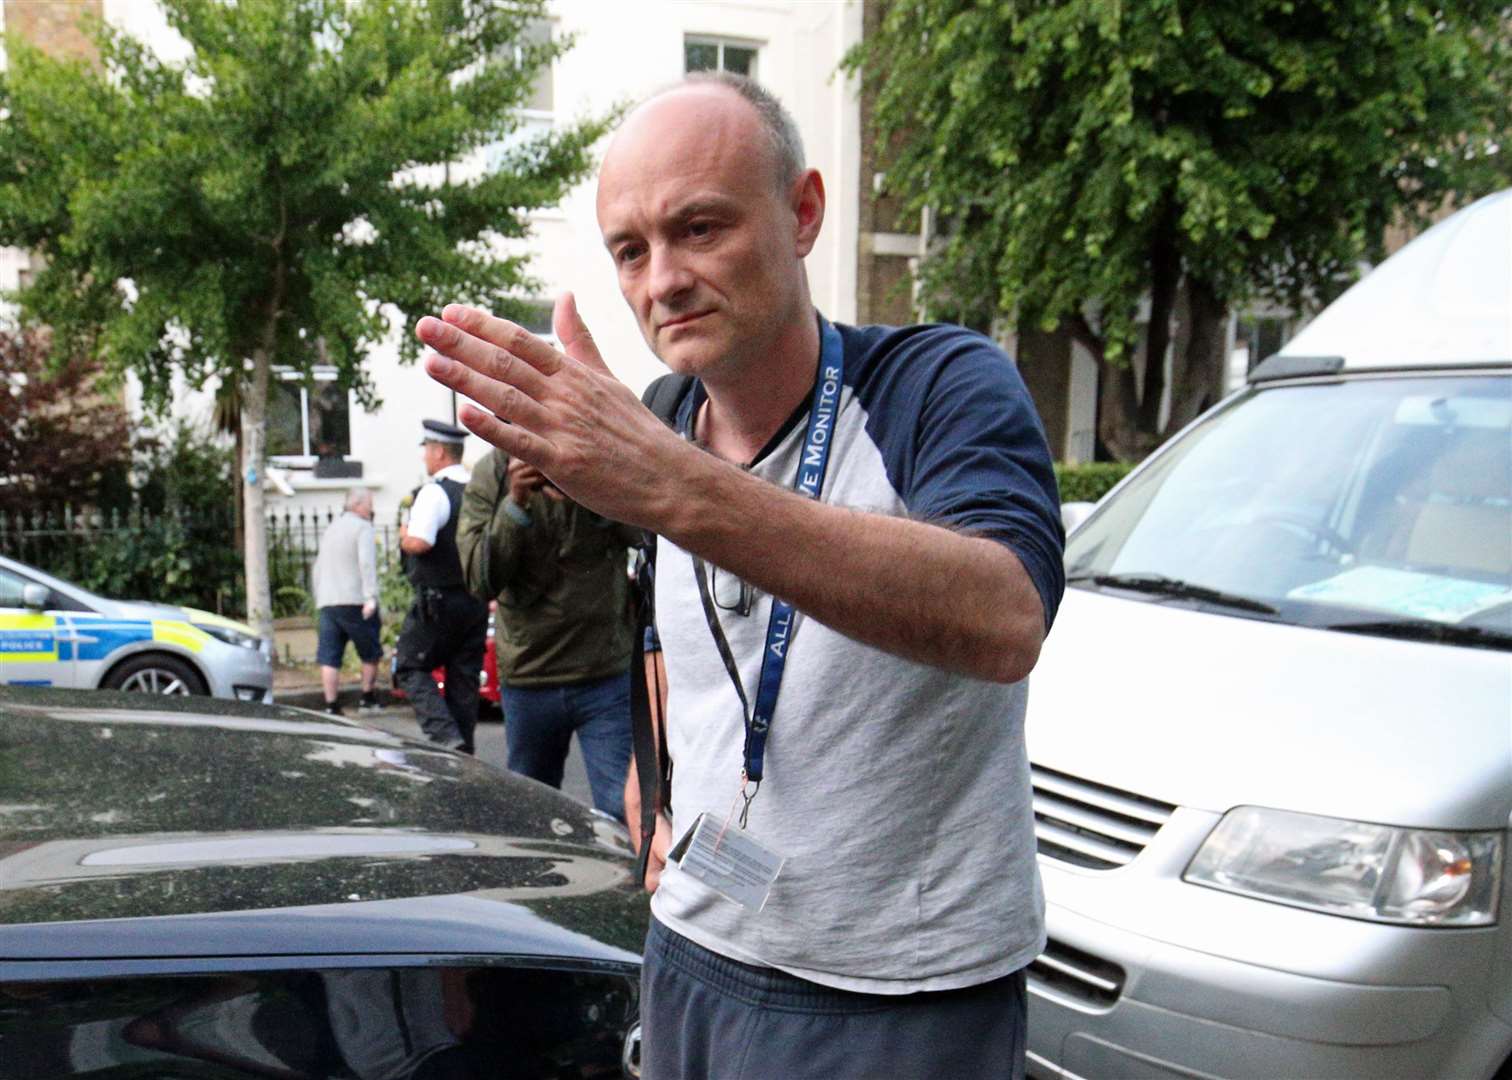 Dominic Cummings arriving back at his north London home, the day after giving a press conference over allegations that he breached coronavirus lockdown restrictions (Jonathan Brady/PA)